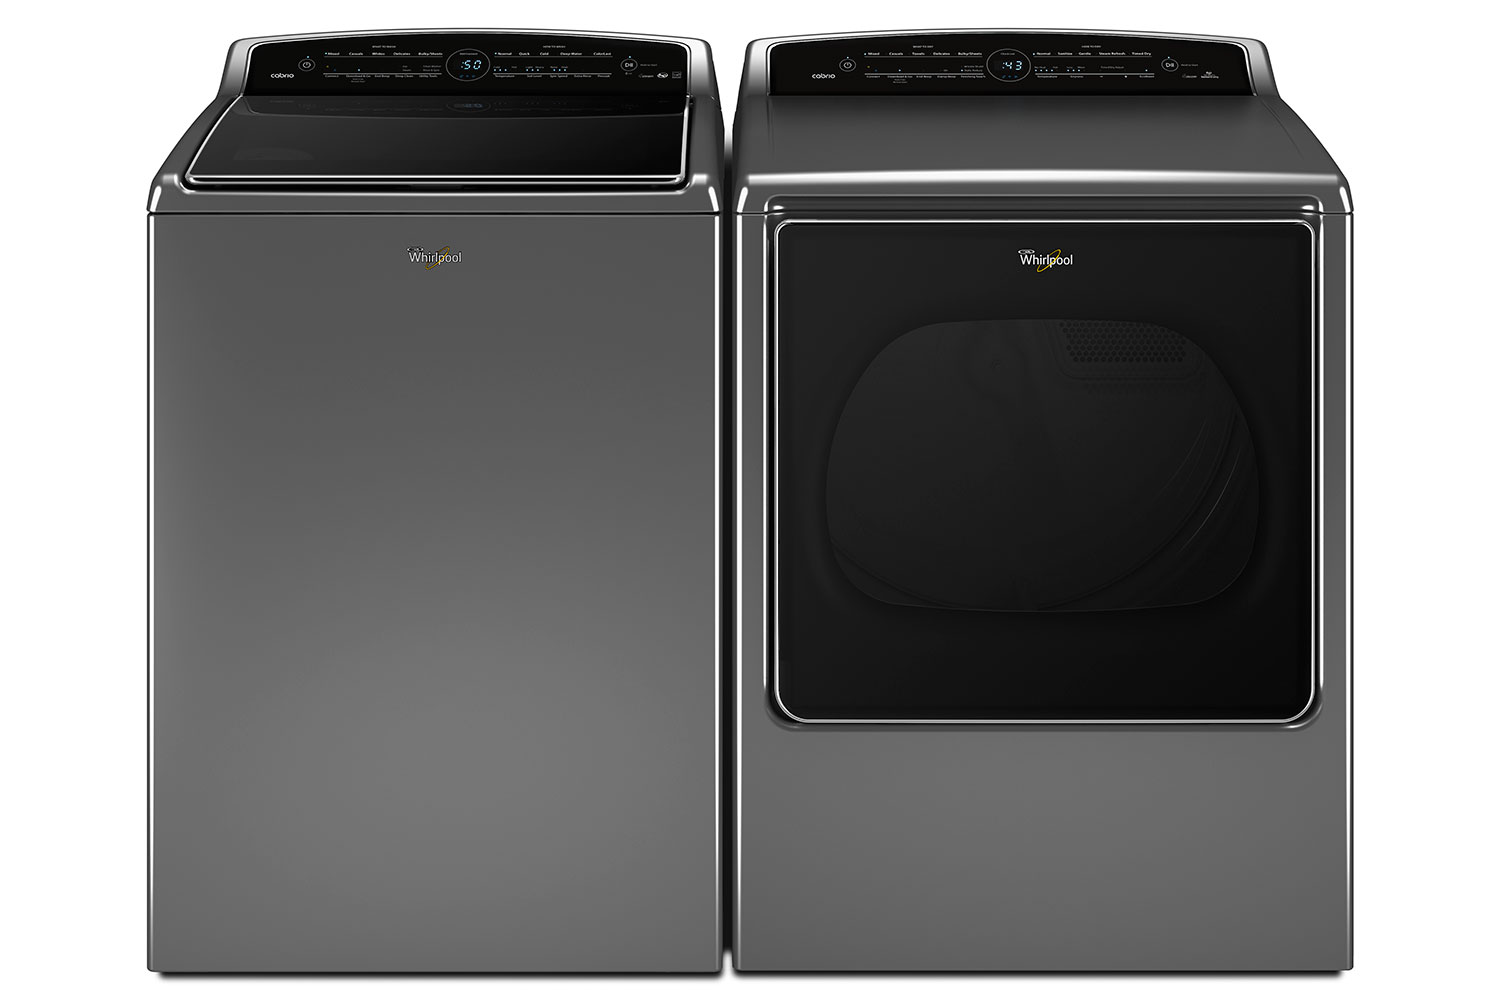 whirlpools smart appliances work with nest and amazon dash whirlpool top load laundry pair p150022 4z